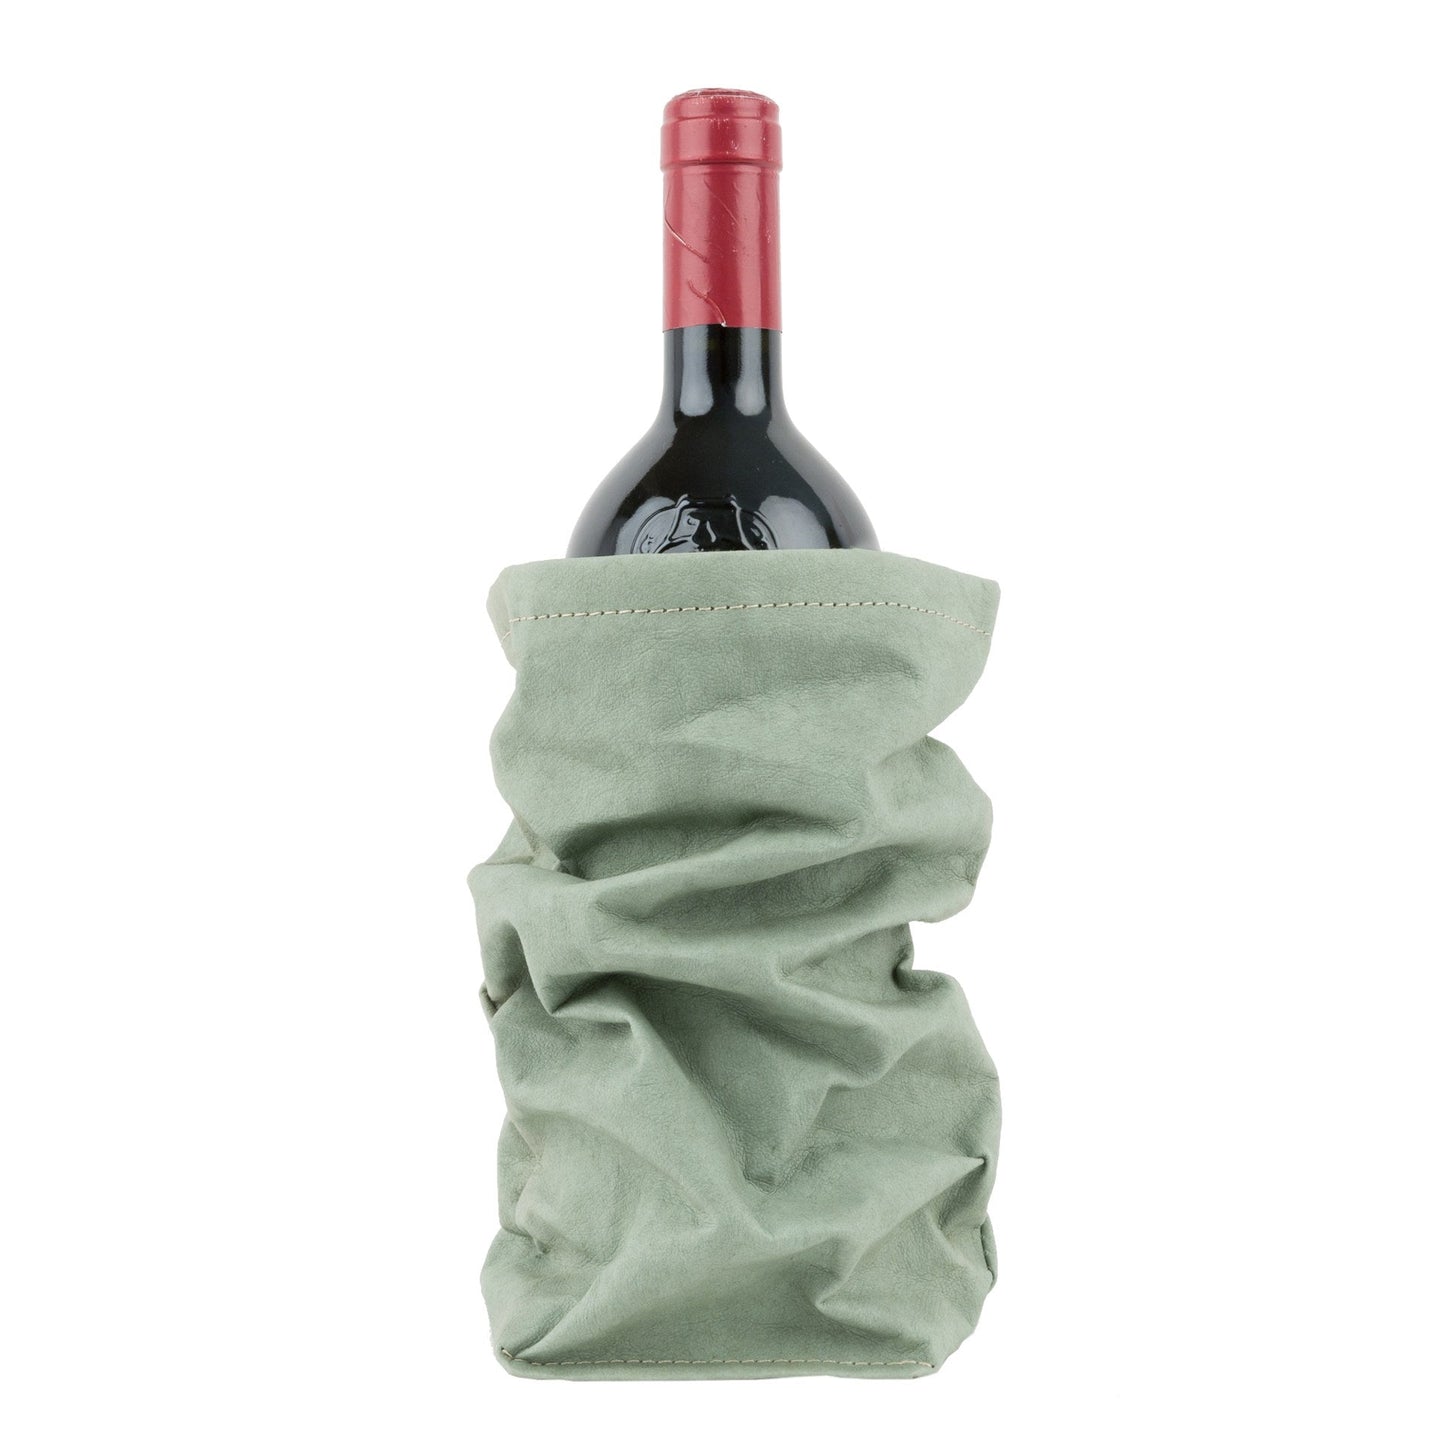 A bottle of red wine is shown inside a pale green washable paper wine holder.